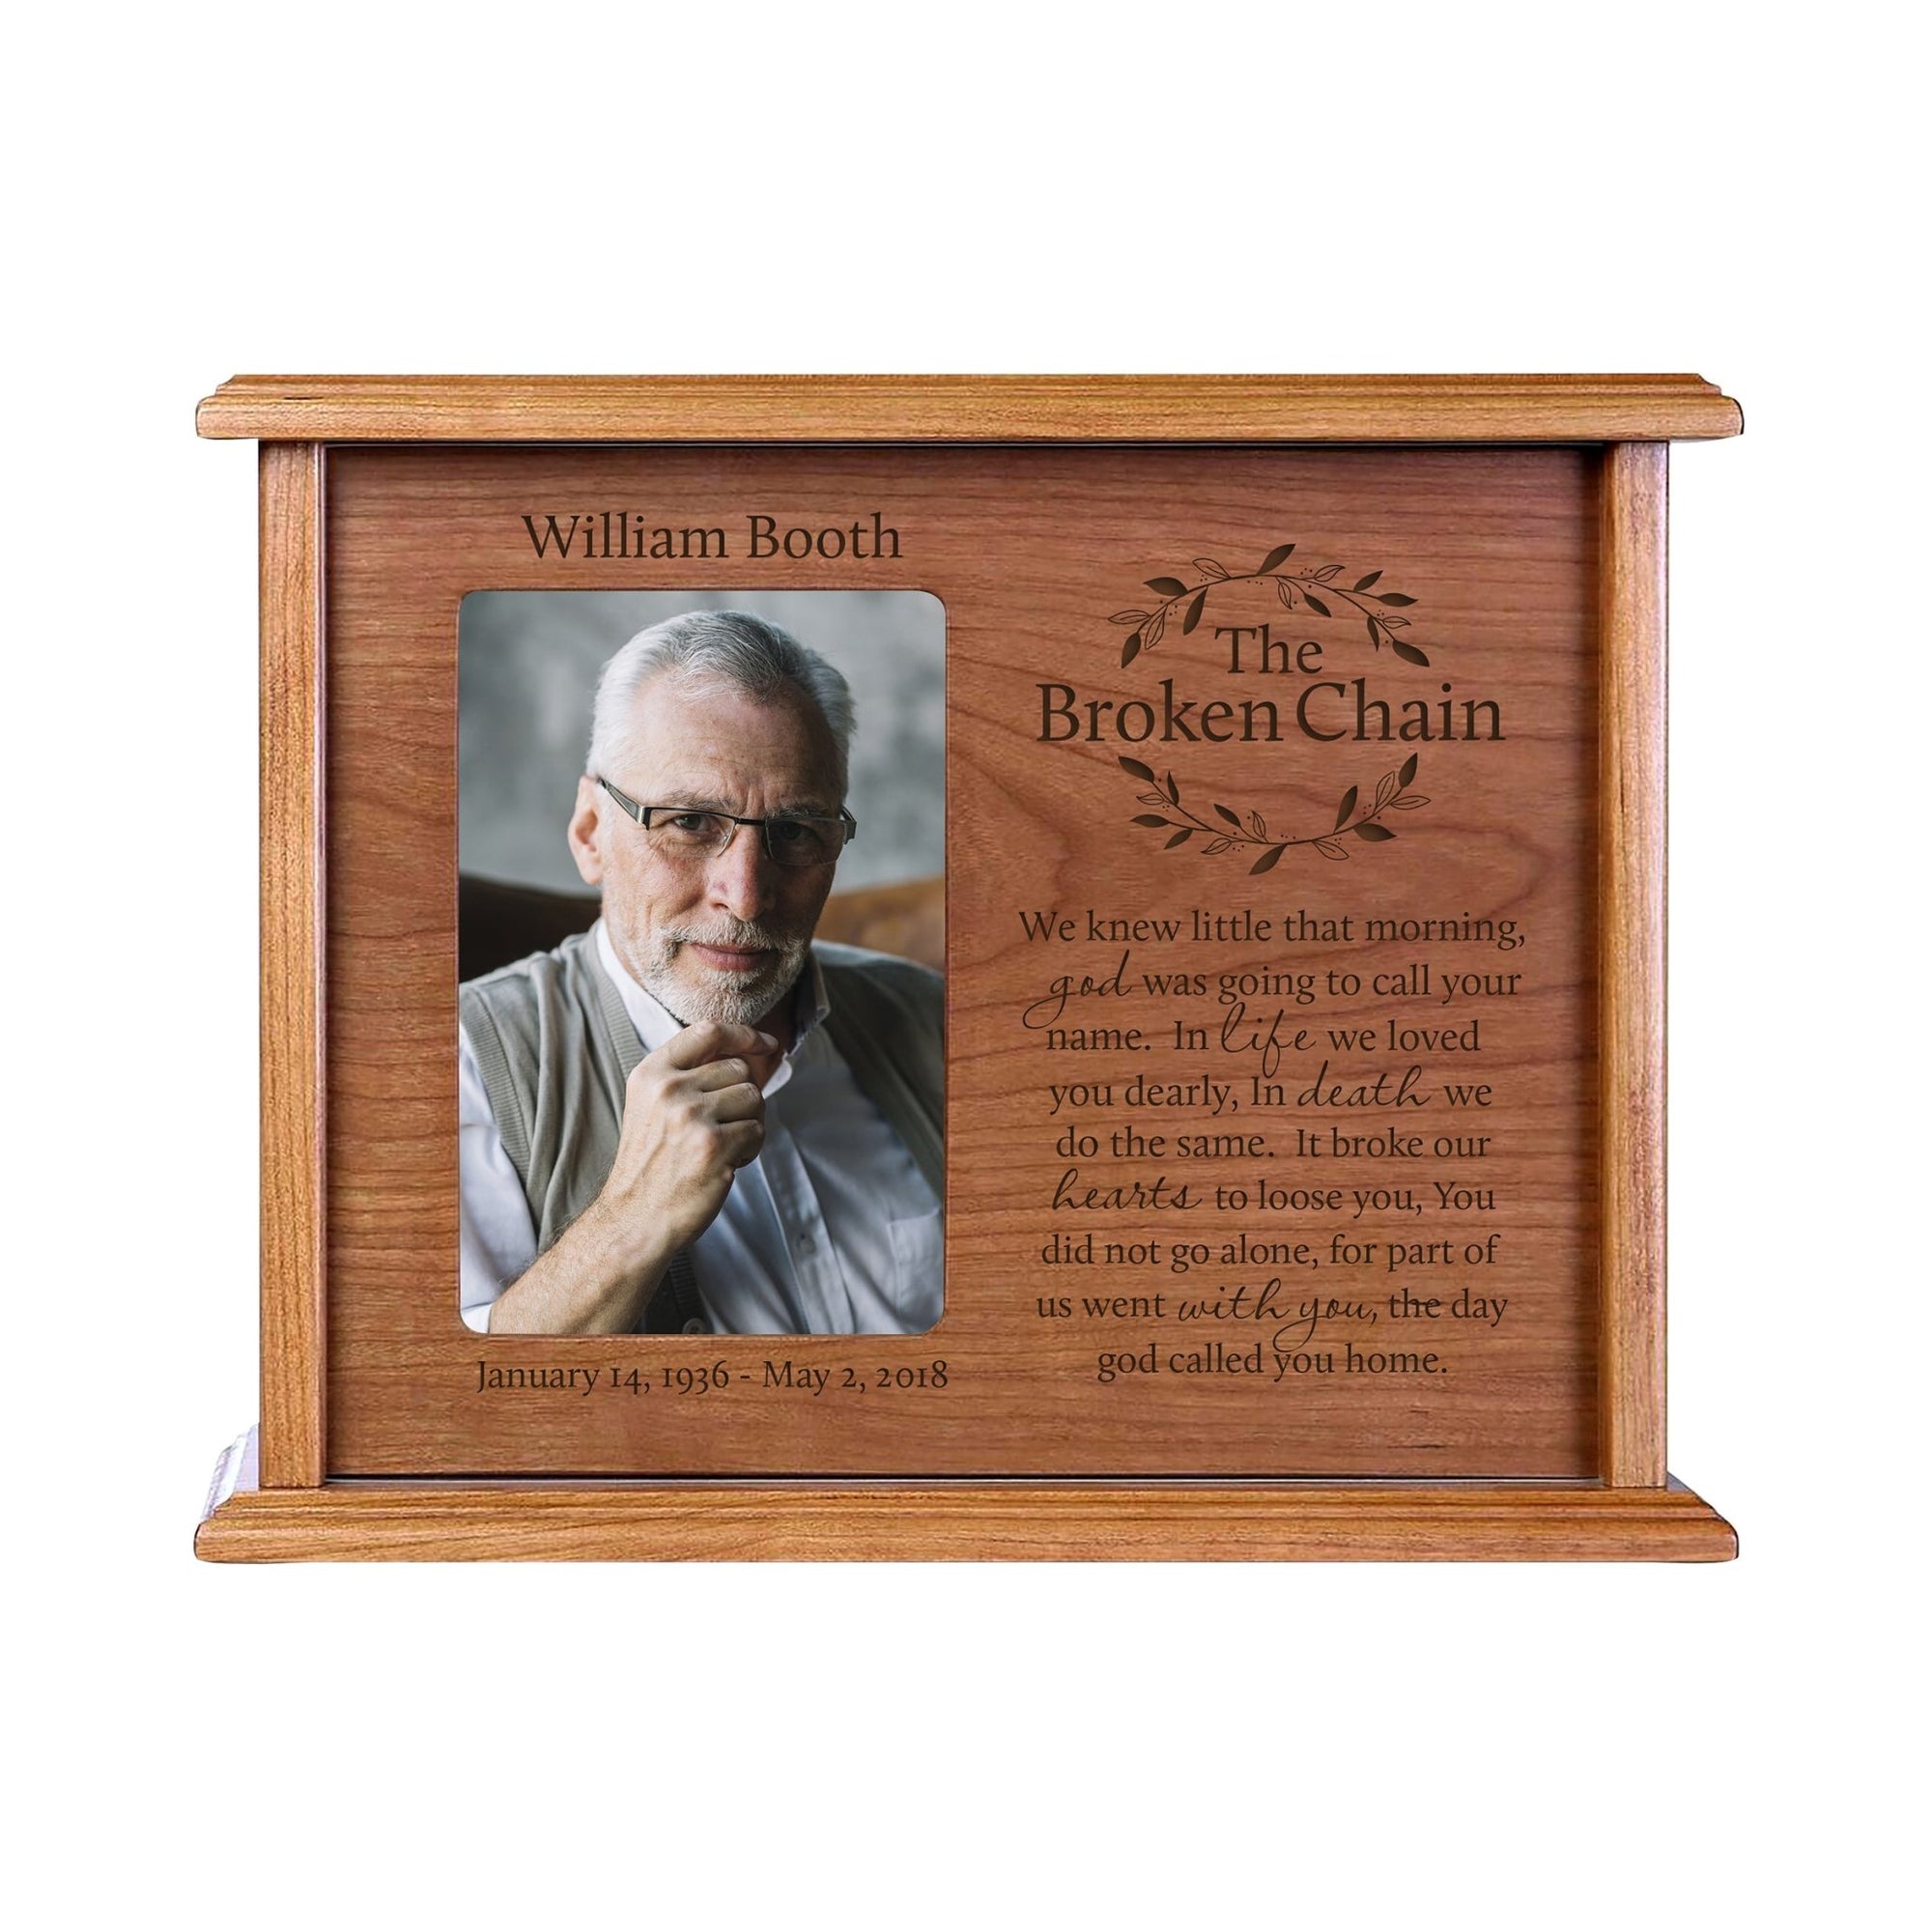 Personalized Memorial Cremation Wooden Urn Box with 4x6 Photo holds 200 cu in The Broken Chain (wreath) - LifeSong Milestones